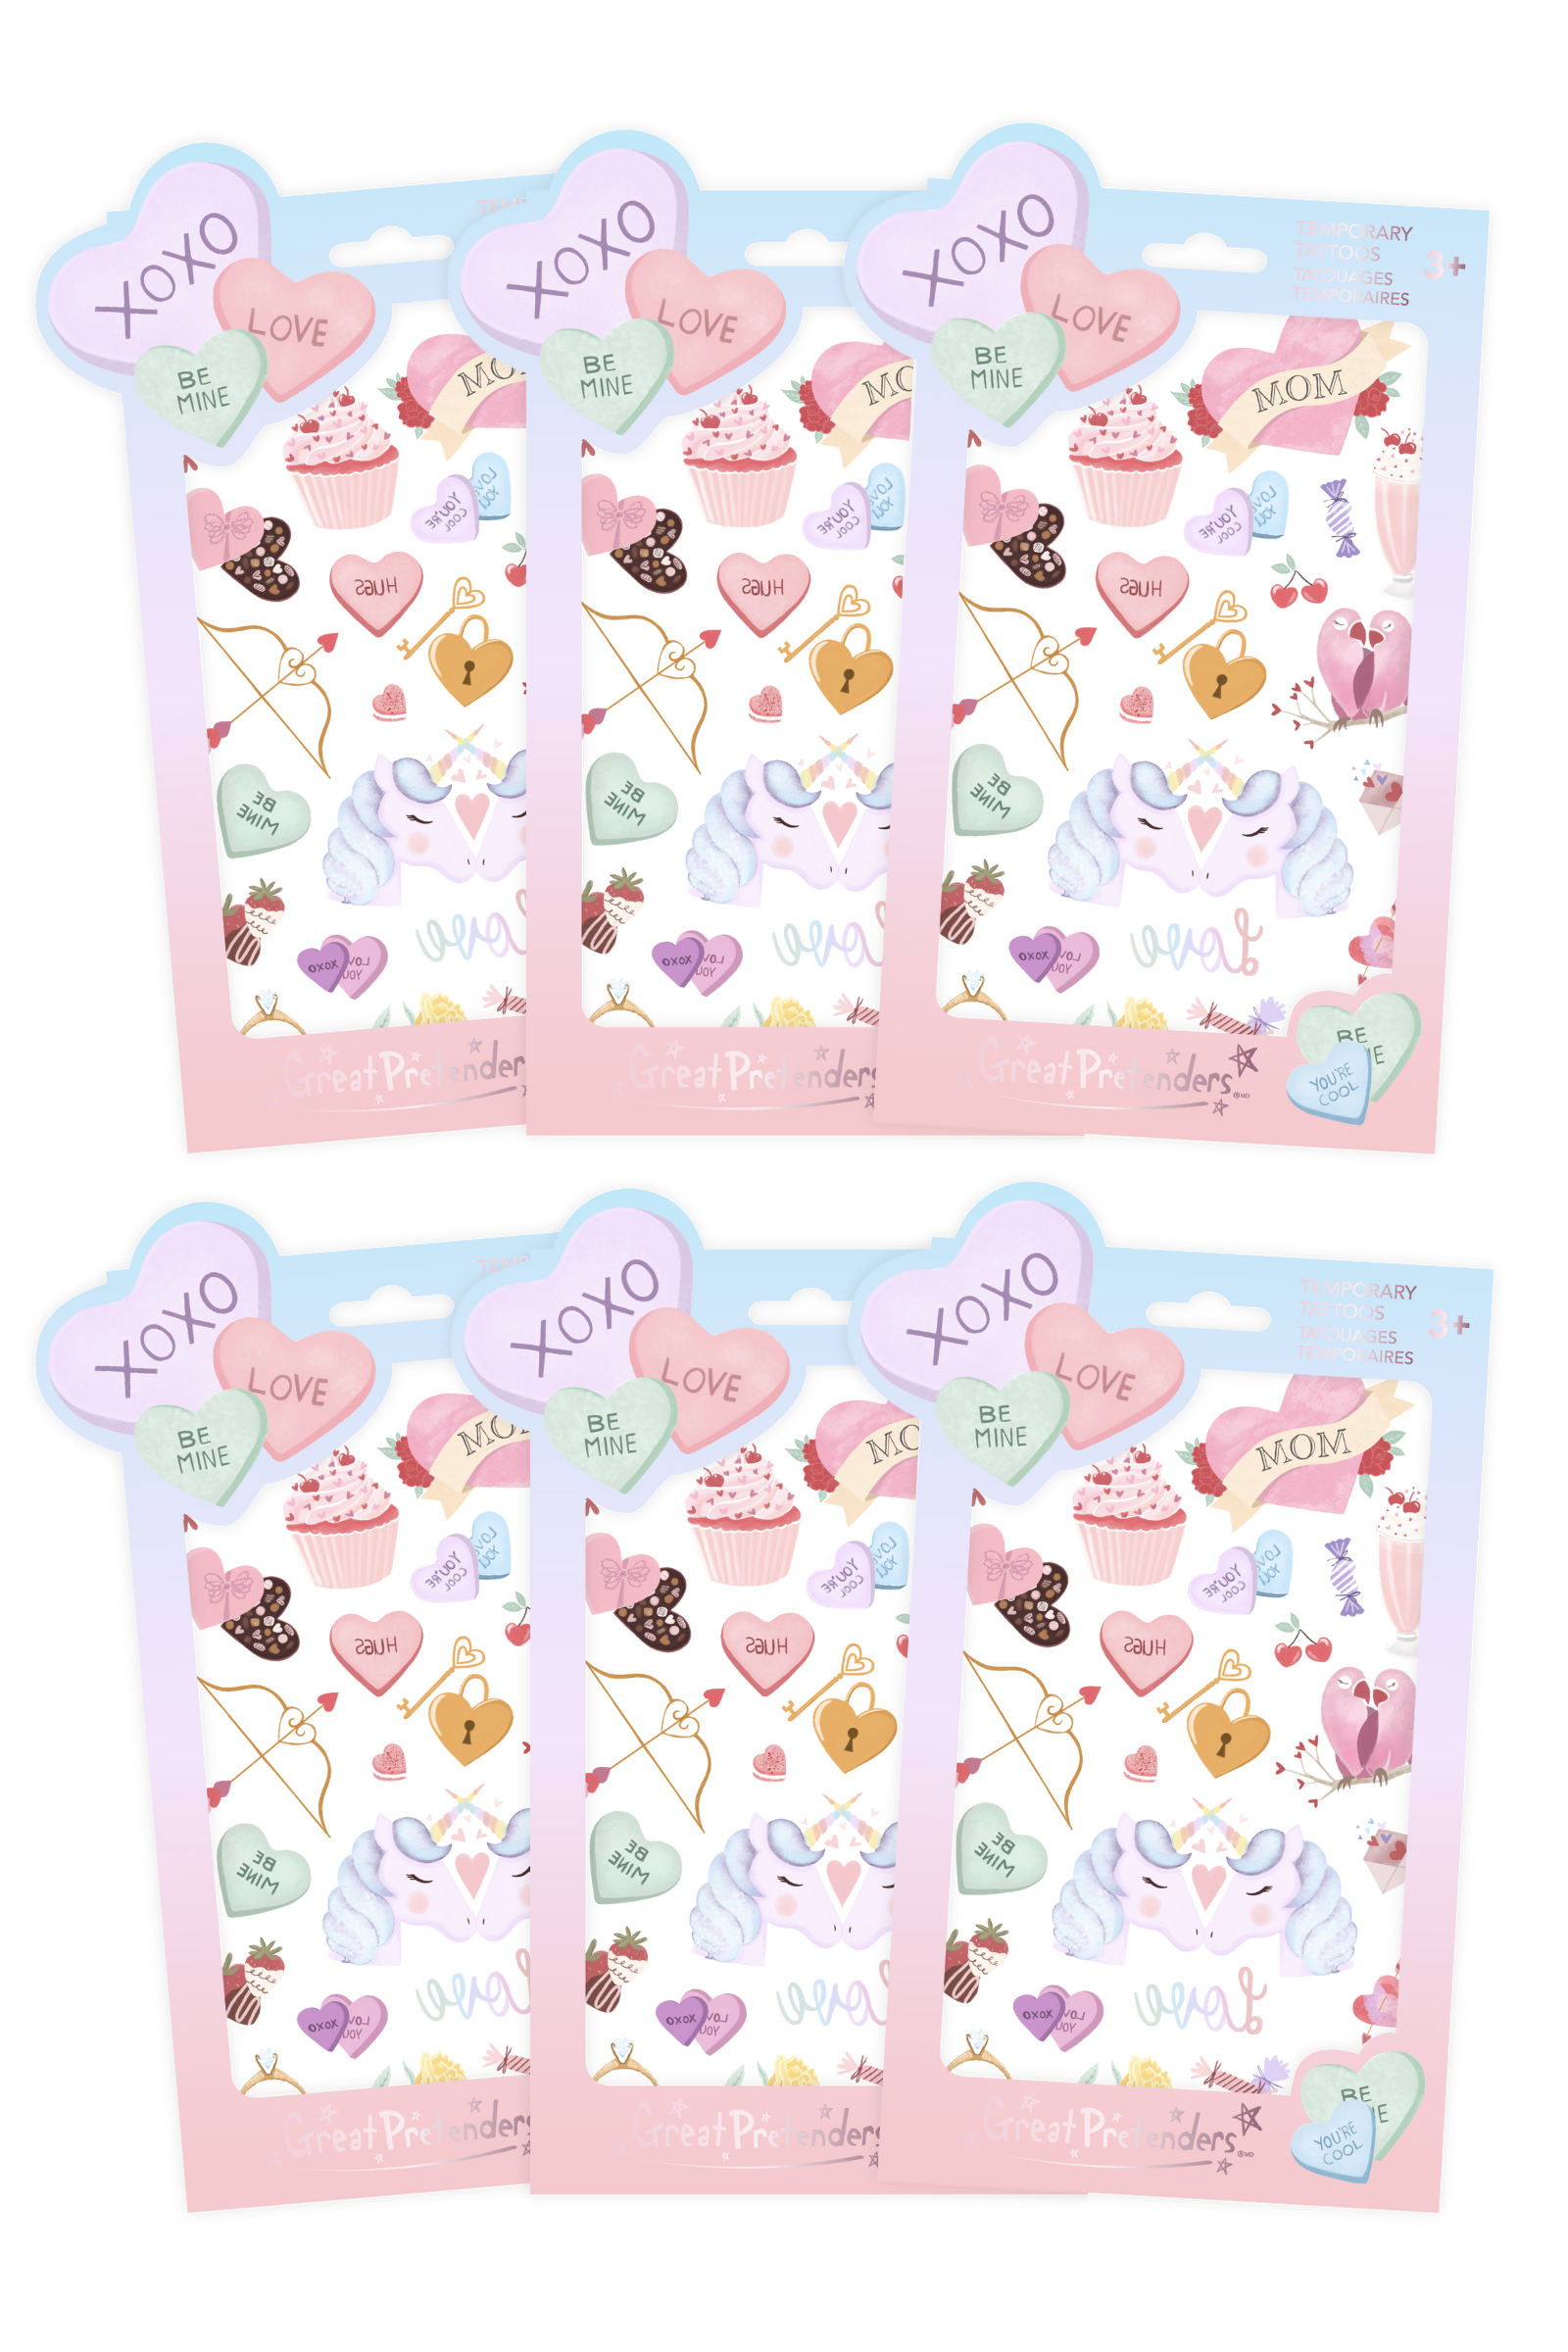 6 Packs of Candy Heart Temporary Tattoos